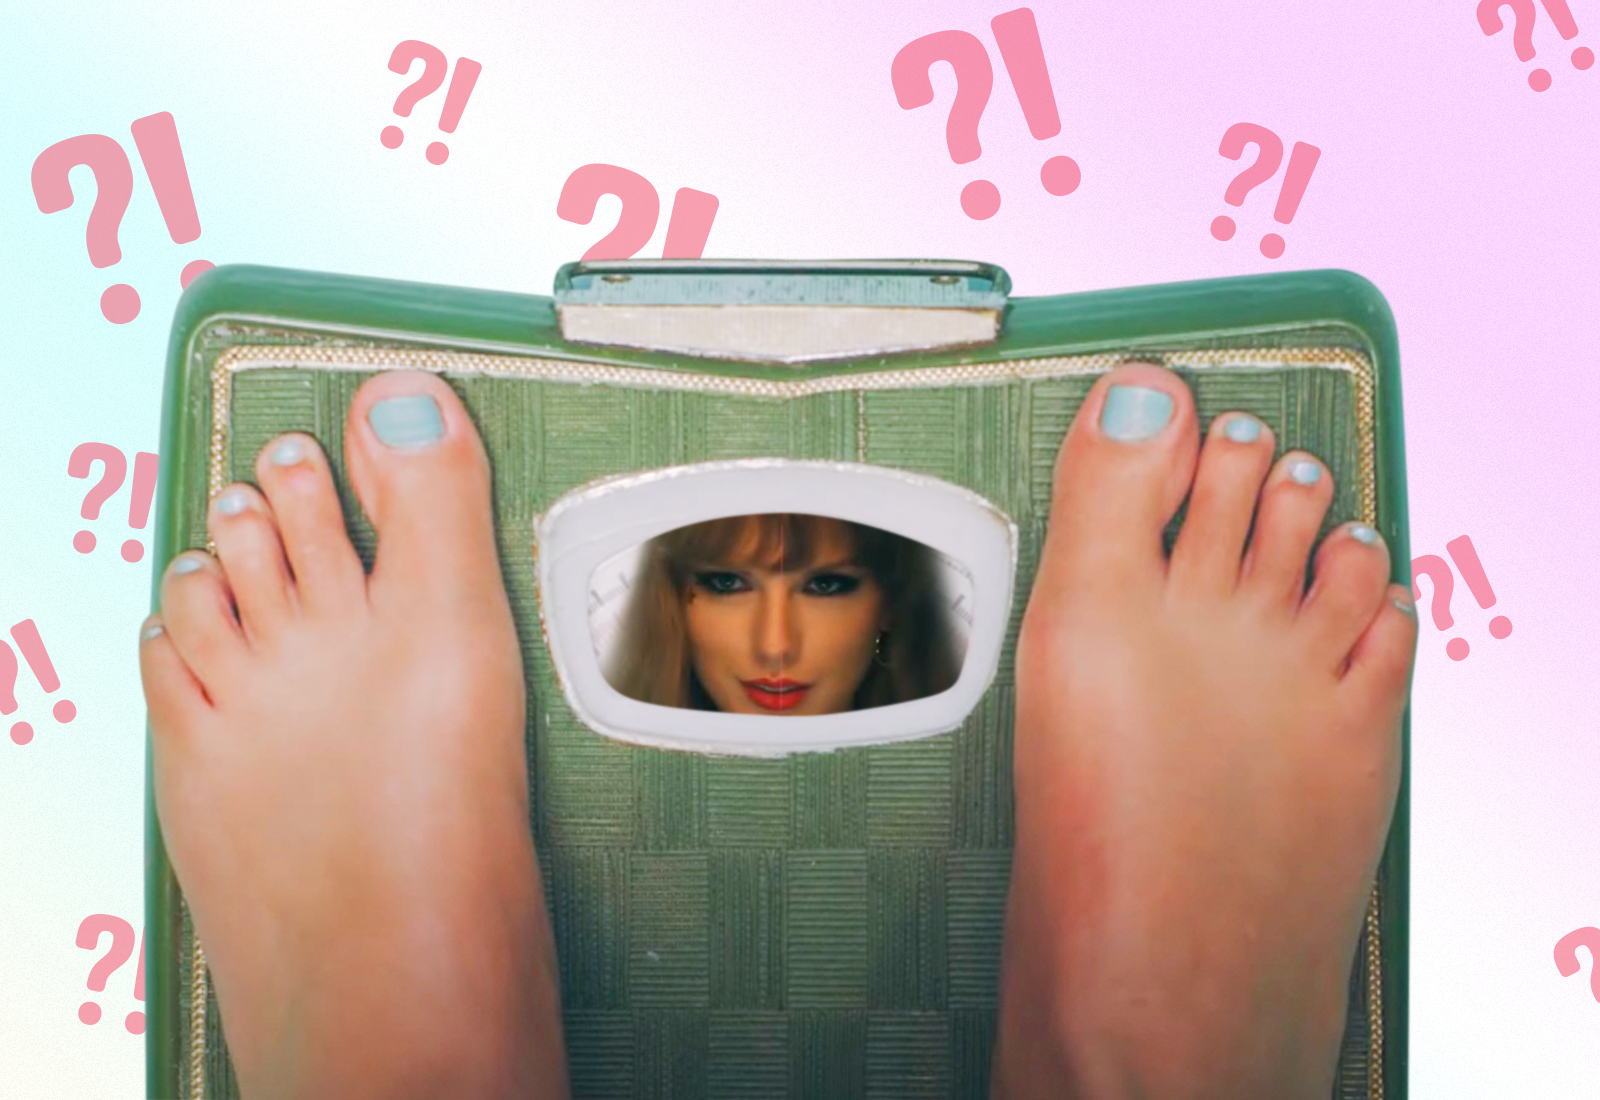 Taylor Swift&#x27;s face appears in the number window of a weight scale